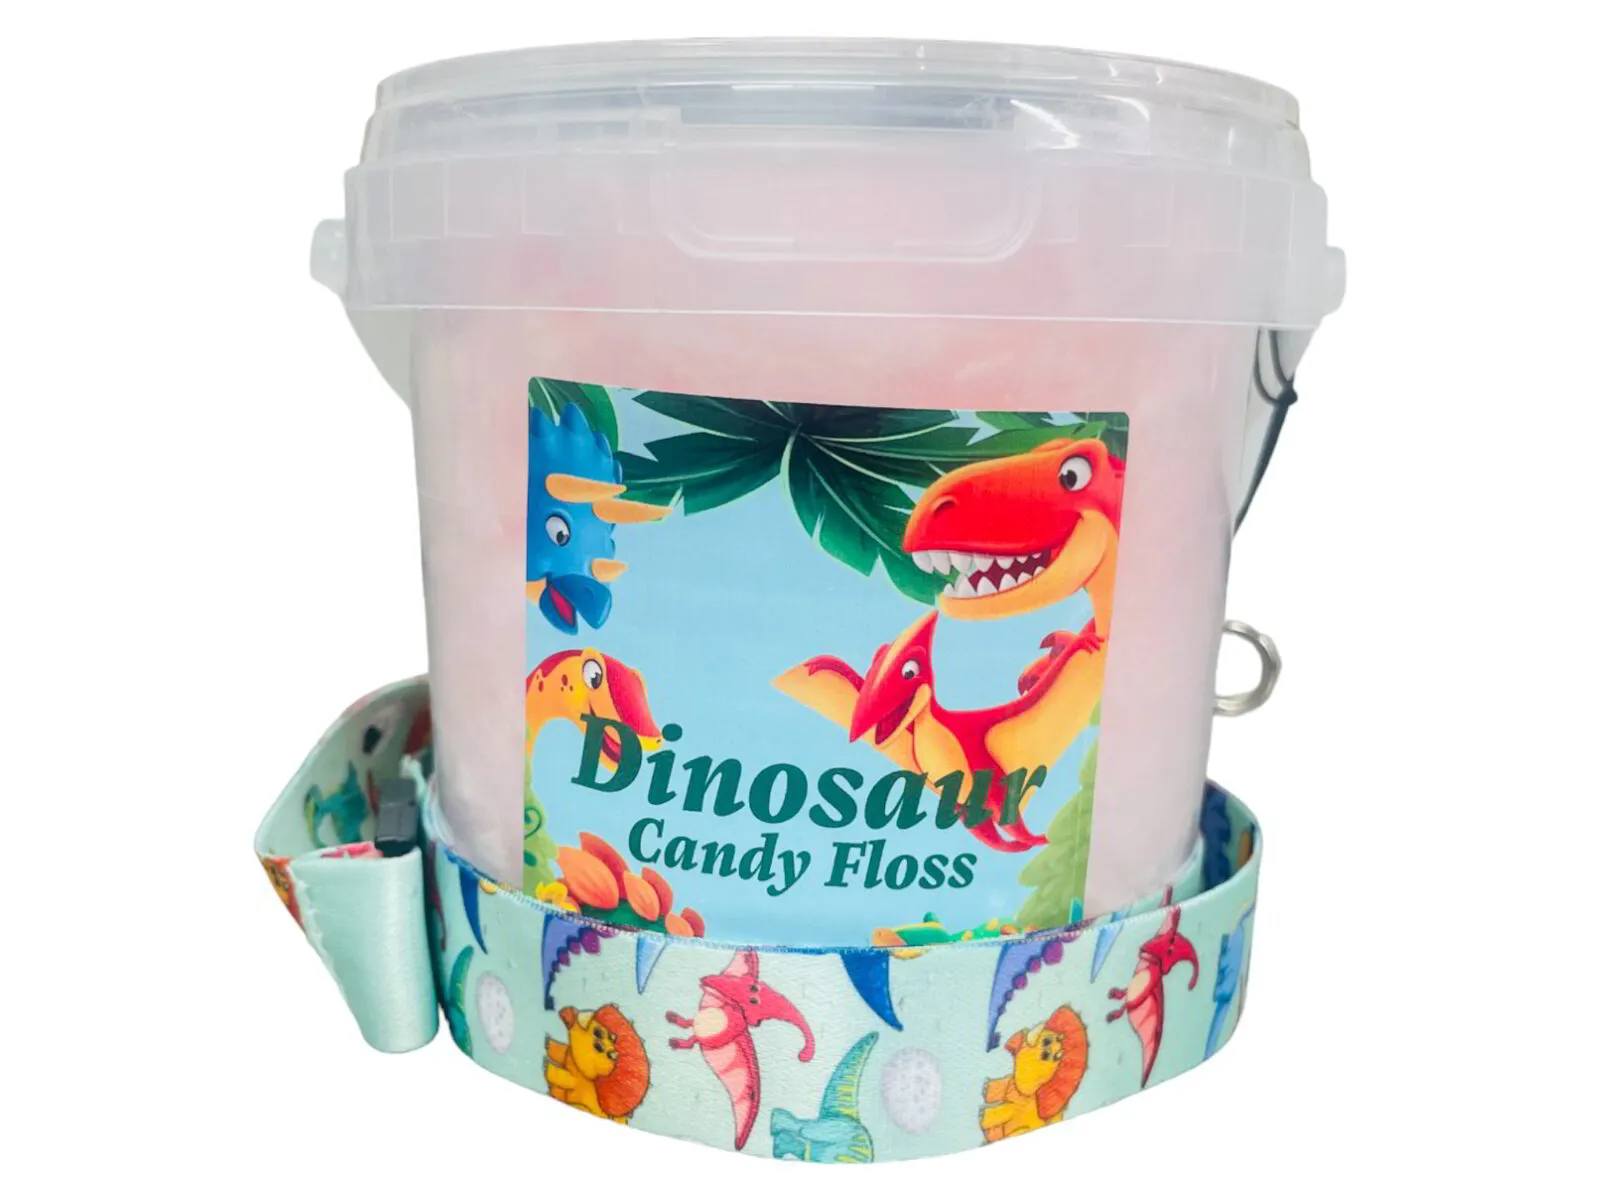 12x Dinosaur Candy Floss Tubs with Lanyard